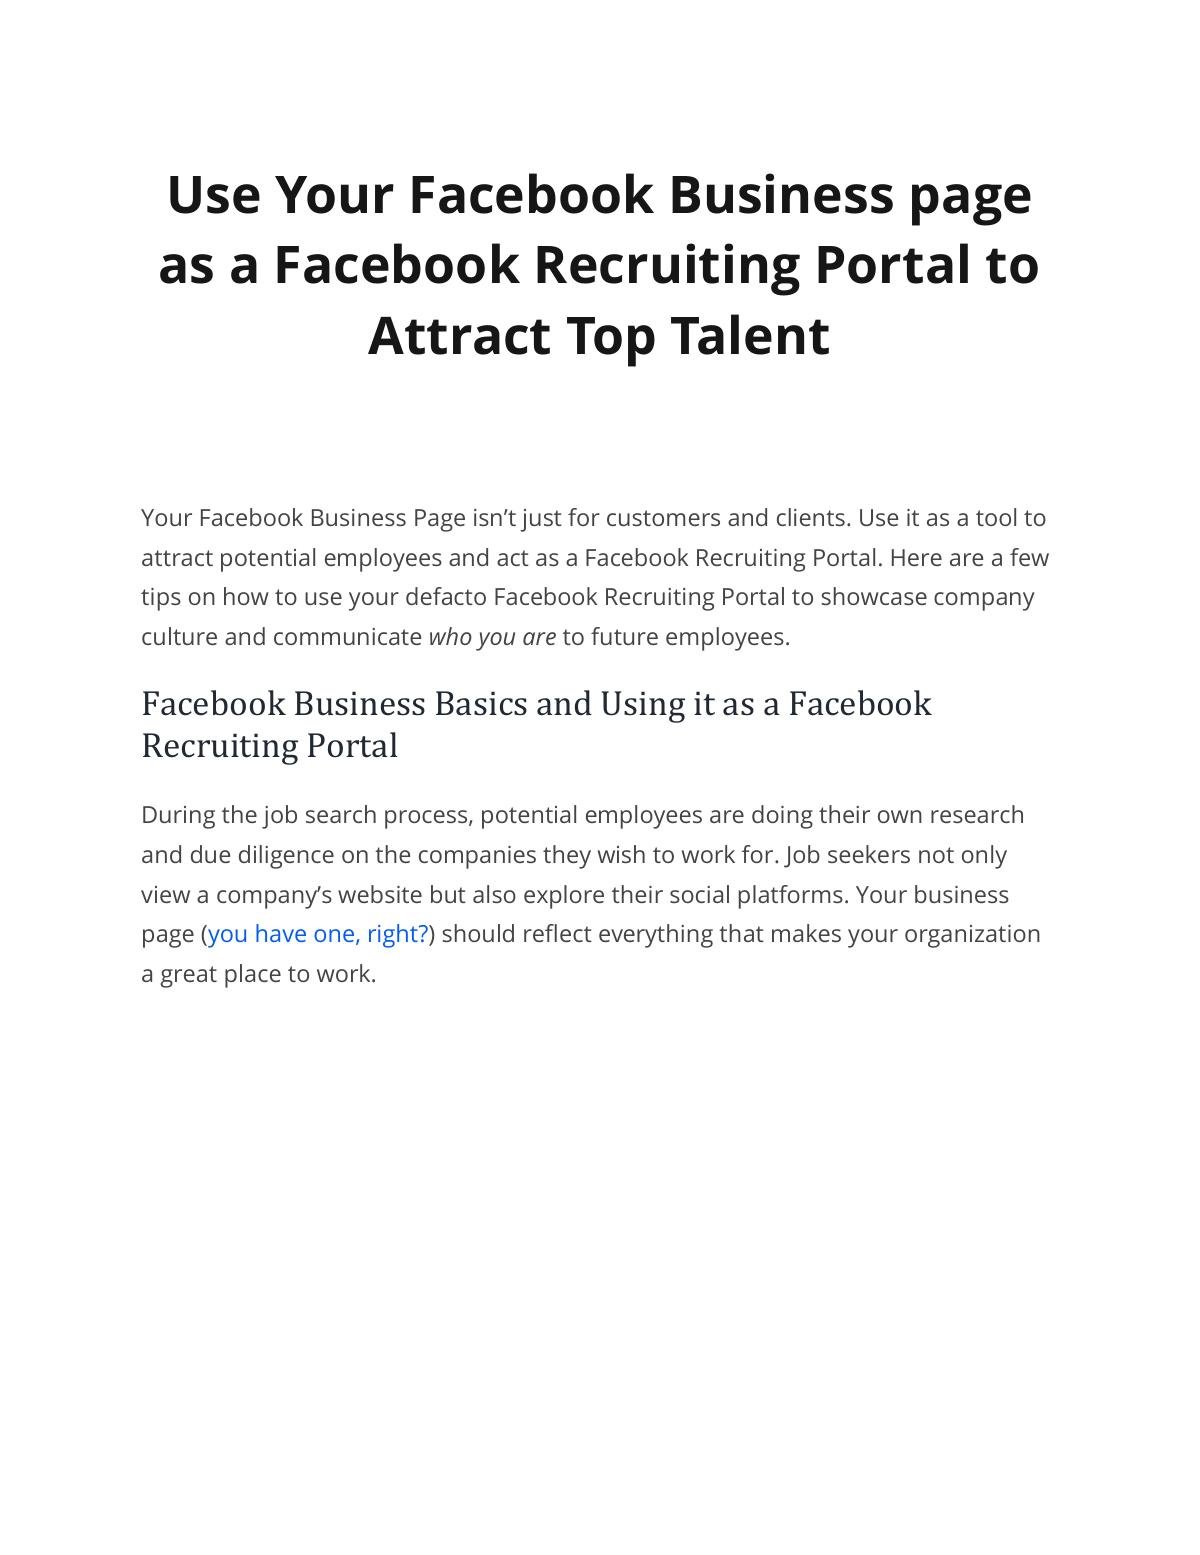 Use Your Facebook Business page as a Facebook Recruiting Portal to Attract Top Talent 